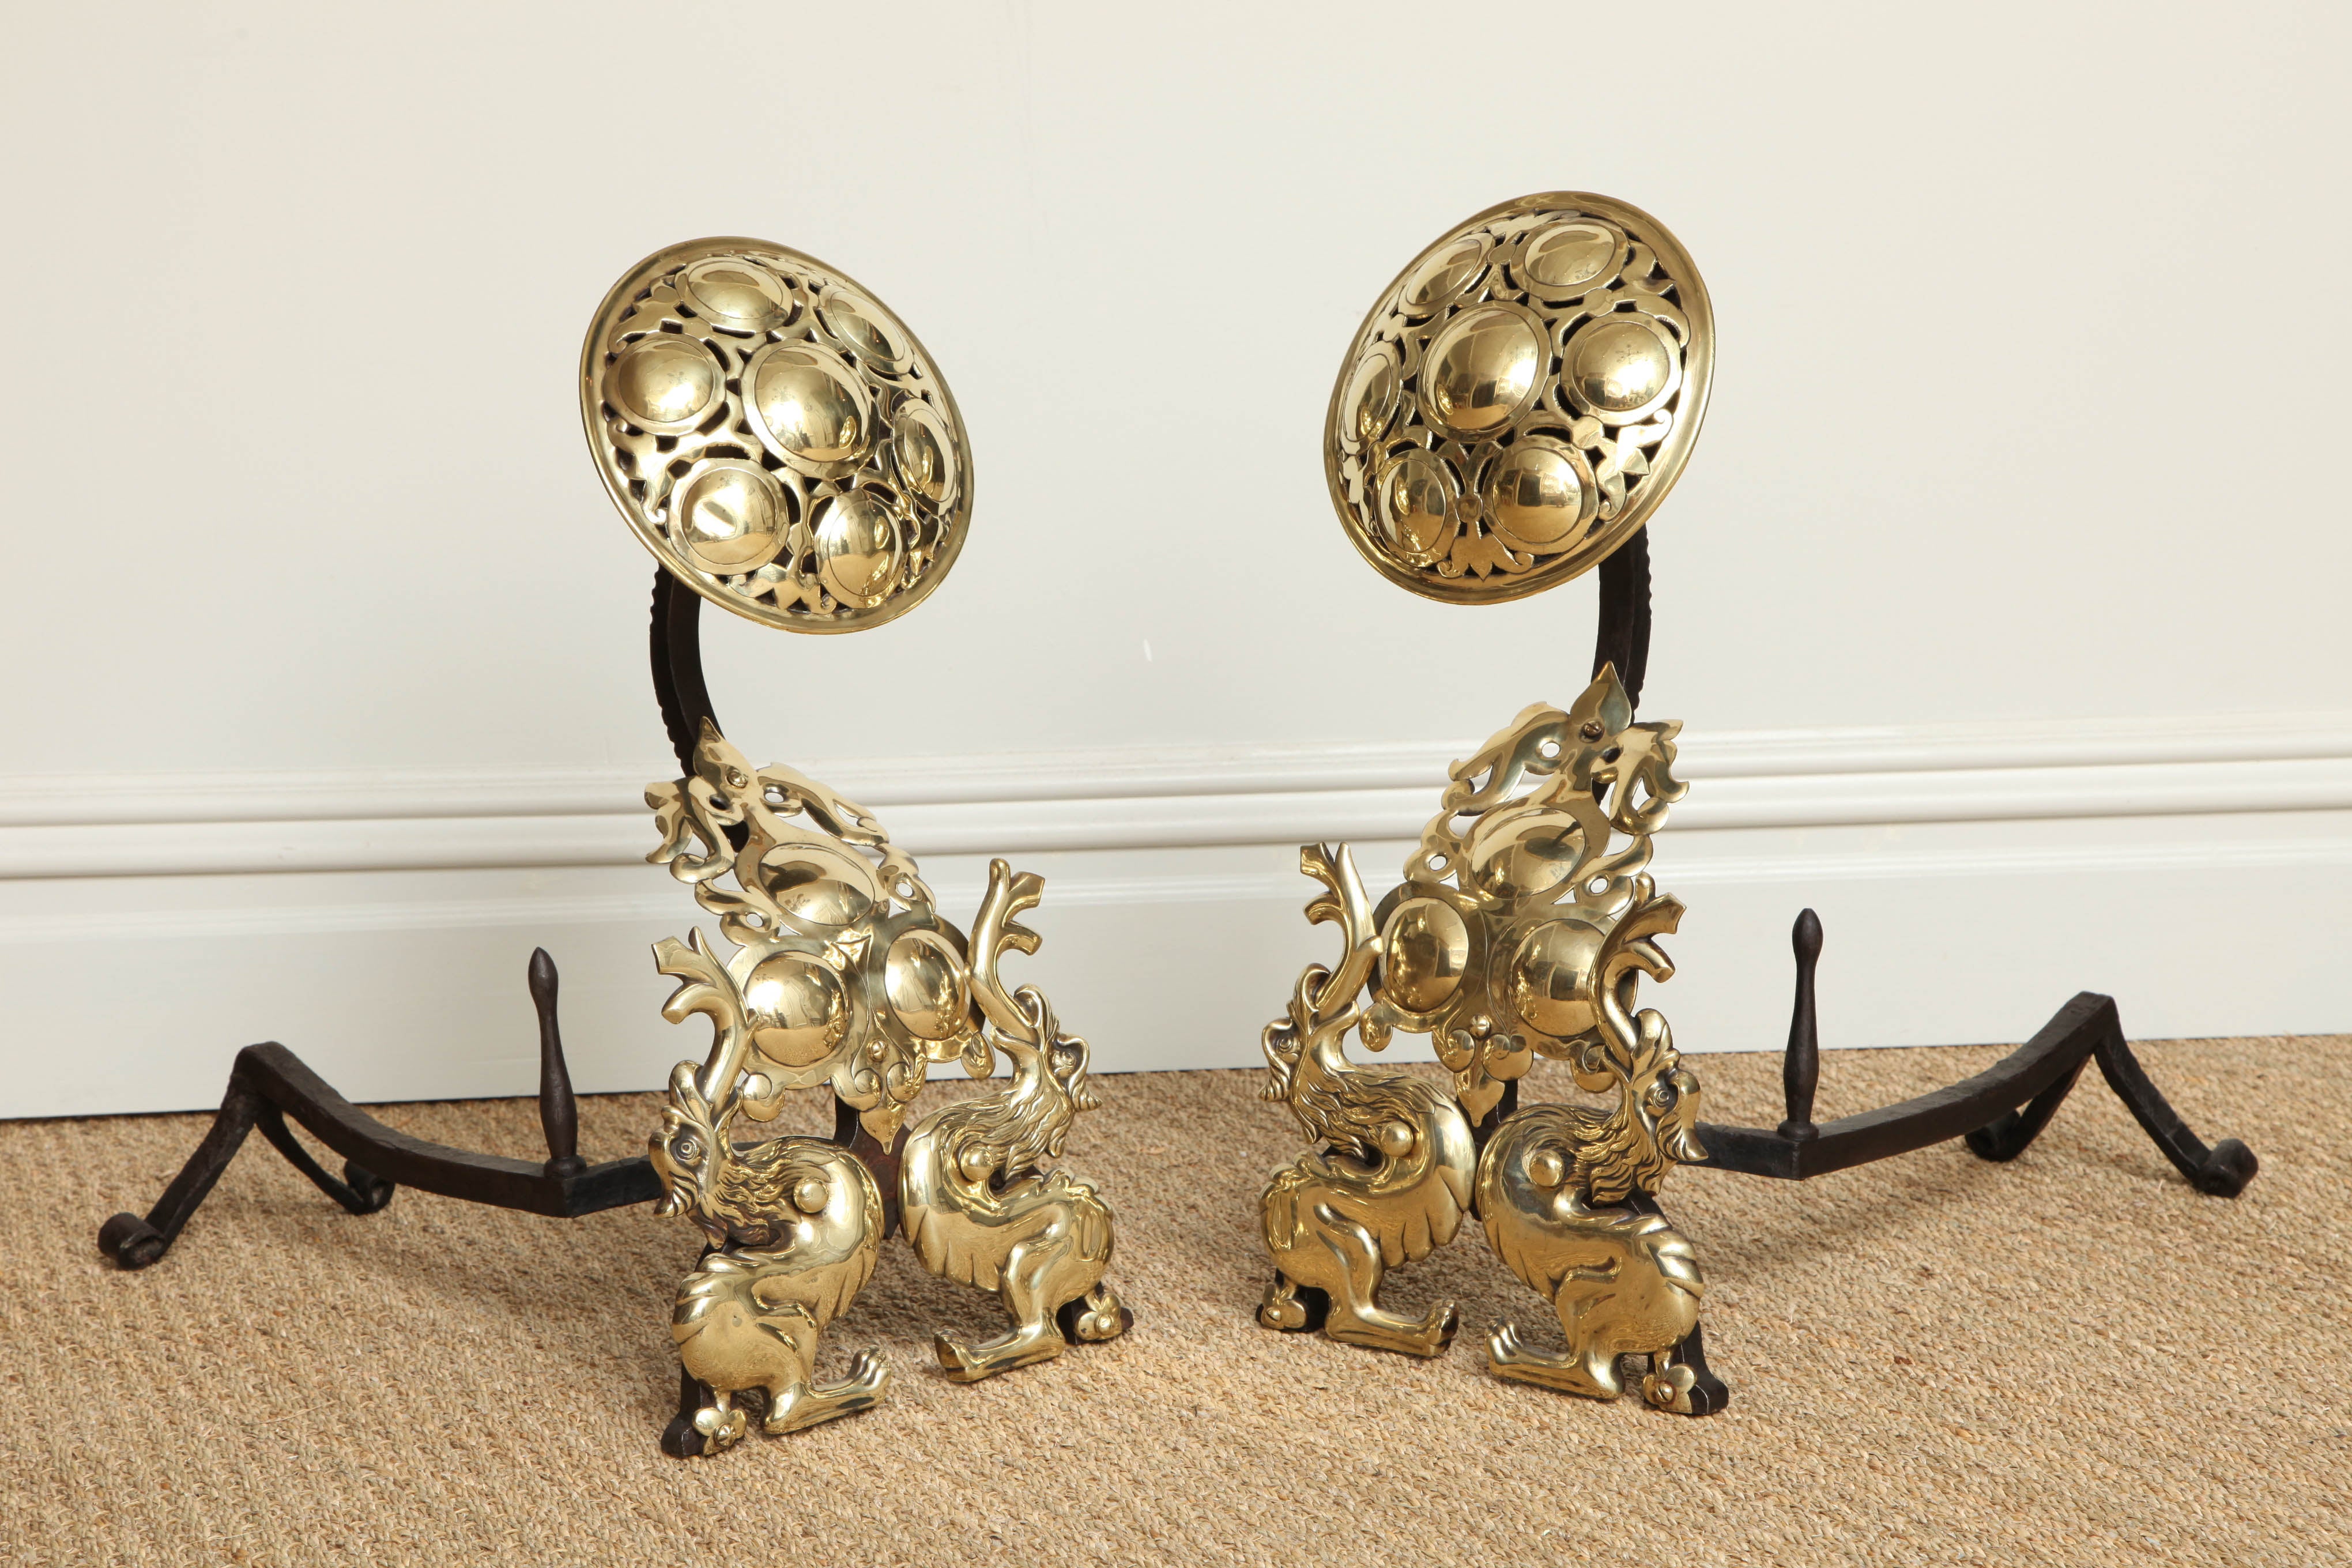 Striking and distinctive pair of English Arts and Crafts andirons, the pierced brass tops with embossed cabouchons over swan necks flanked by fire breathing griffins or wyverns bestride roundel embellished cartouches, with nicely worked wrought iron